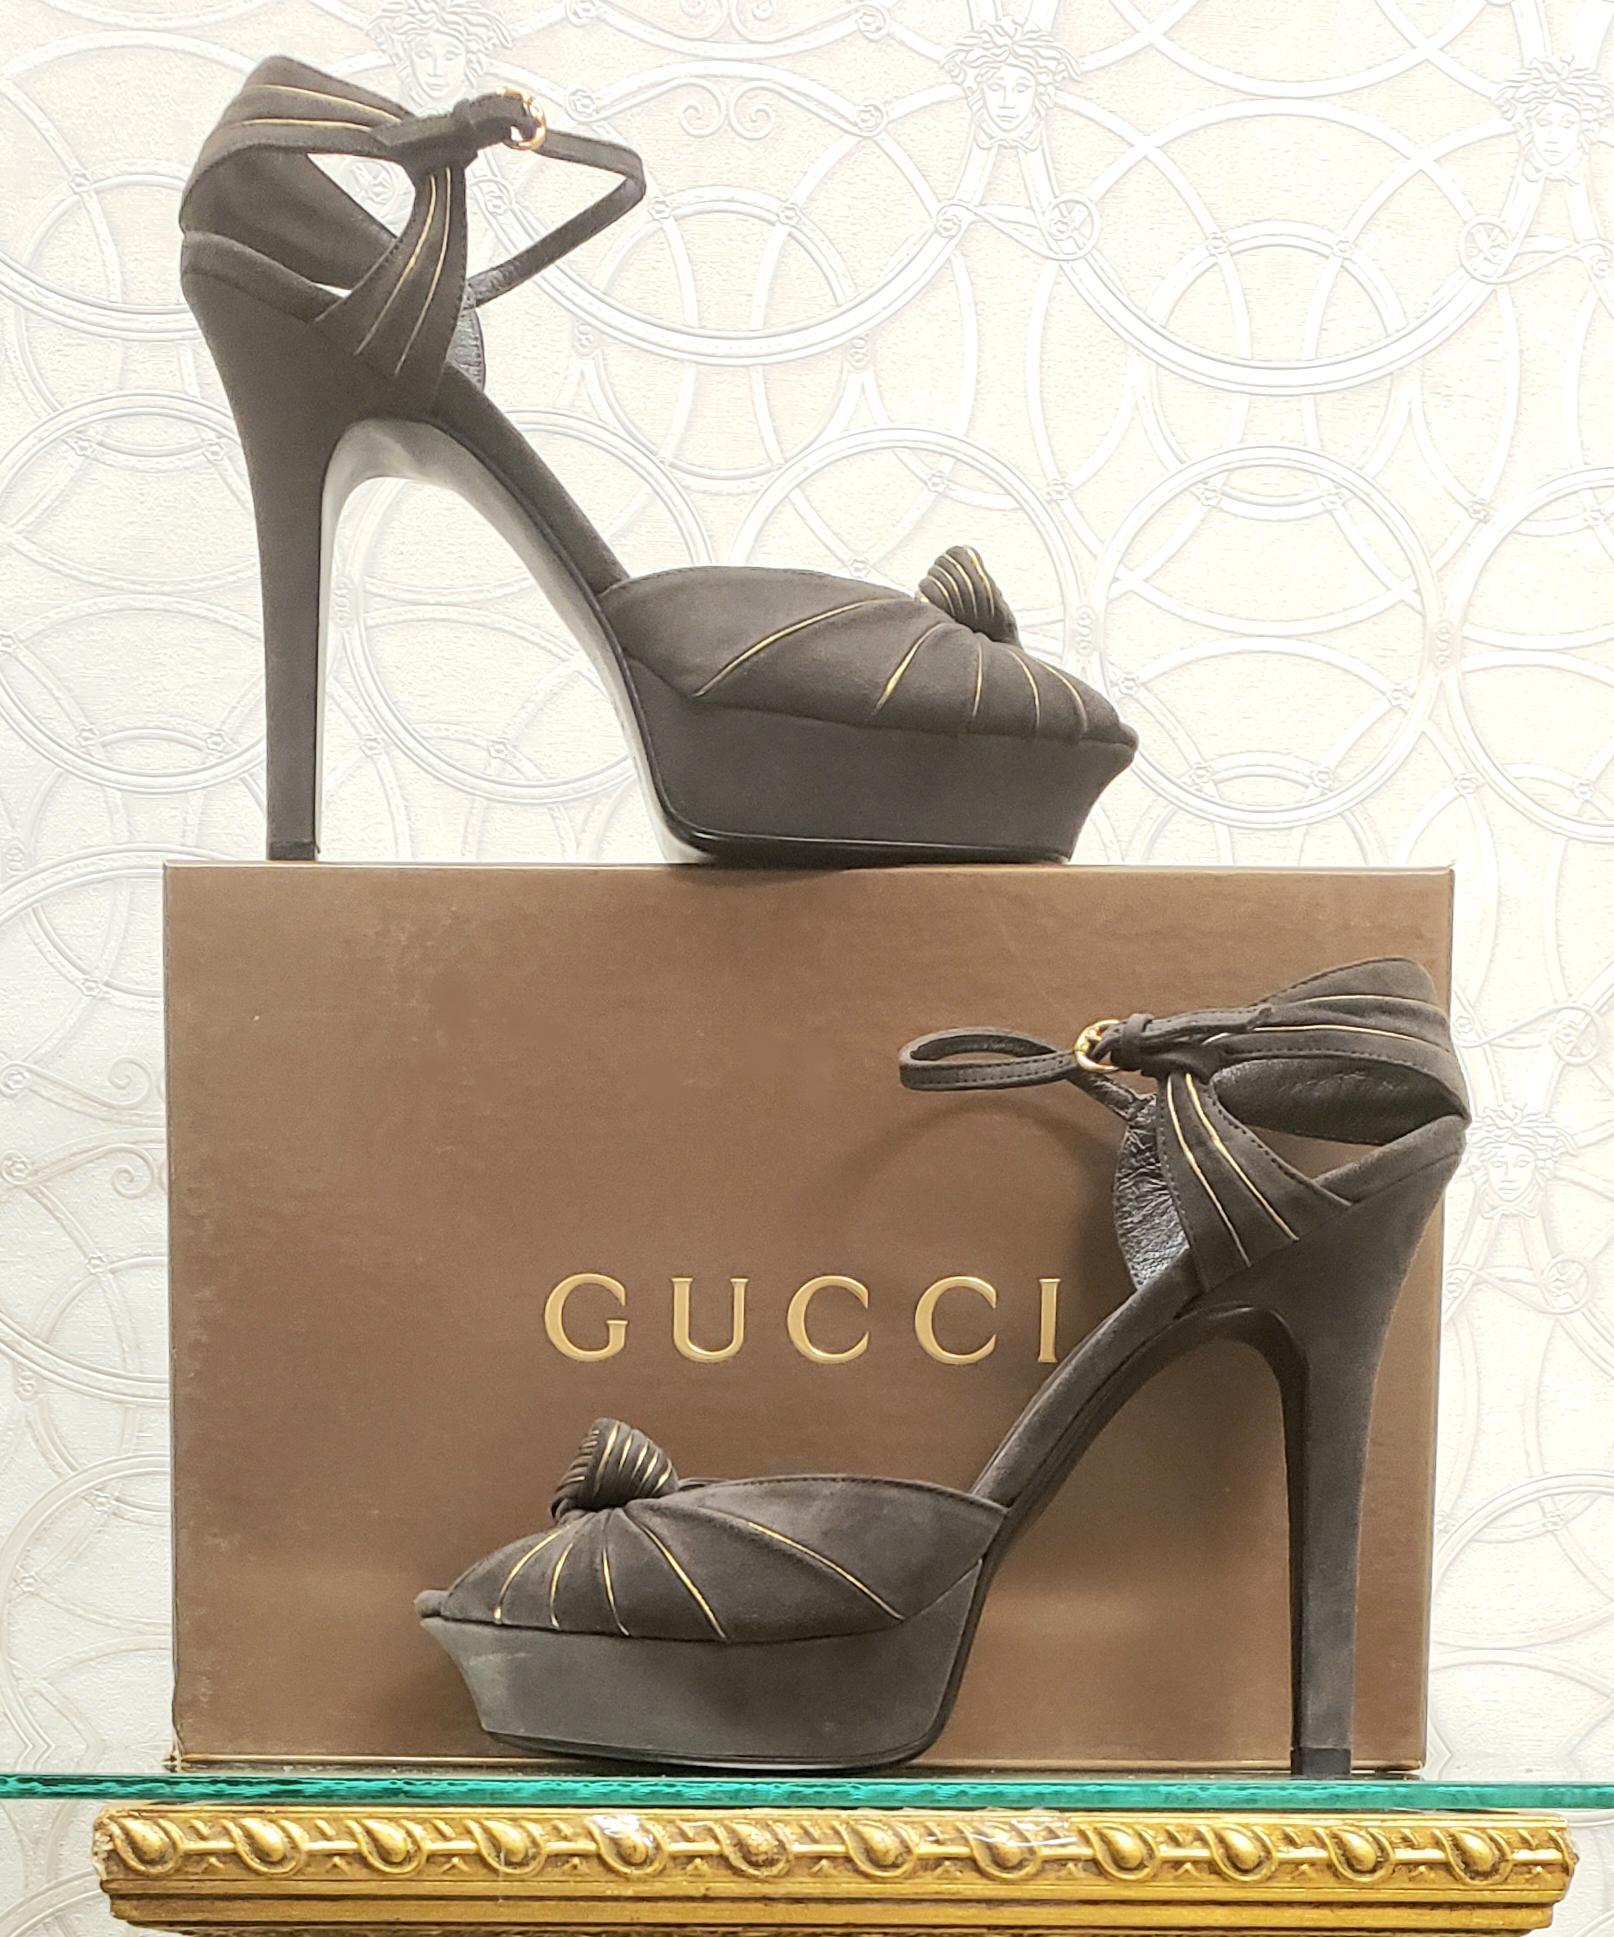 GUCCI SHOES



When creating the perfect outfit, always start off on the right foot with a pair of gorgeous Gucci platform sandals.  

• Suede upper with gold piping trim
• Rounded point peep toe
Color: Grey
• French knot vamp
• Buckle adjustable